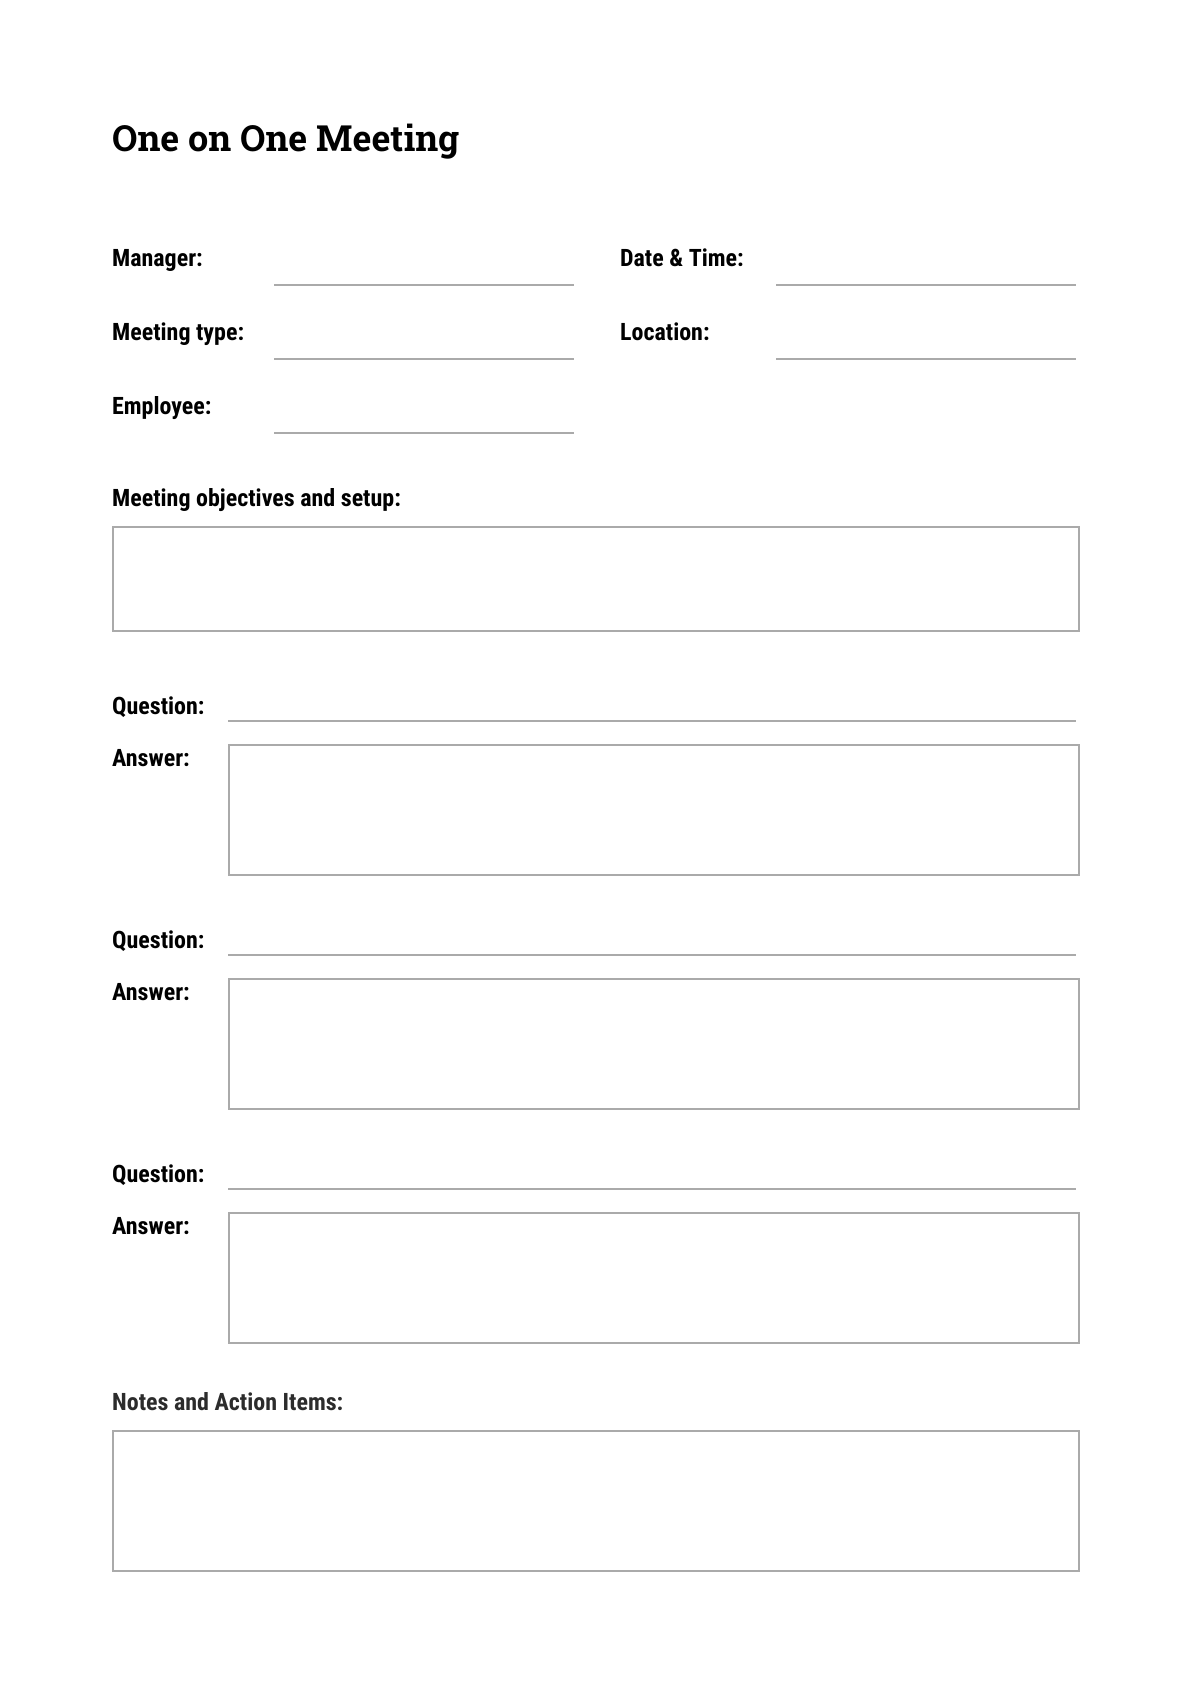 One on One Meeting Template